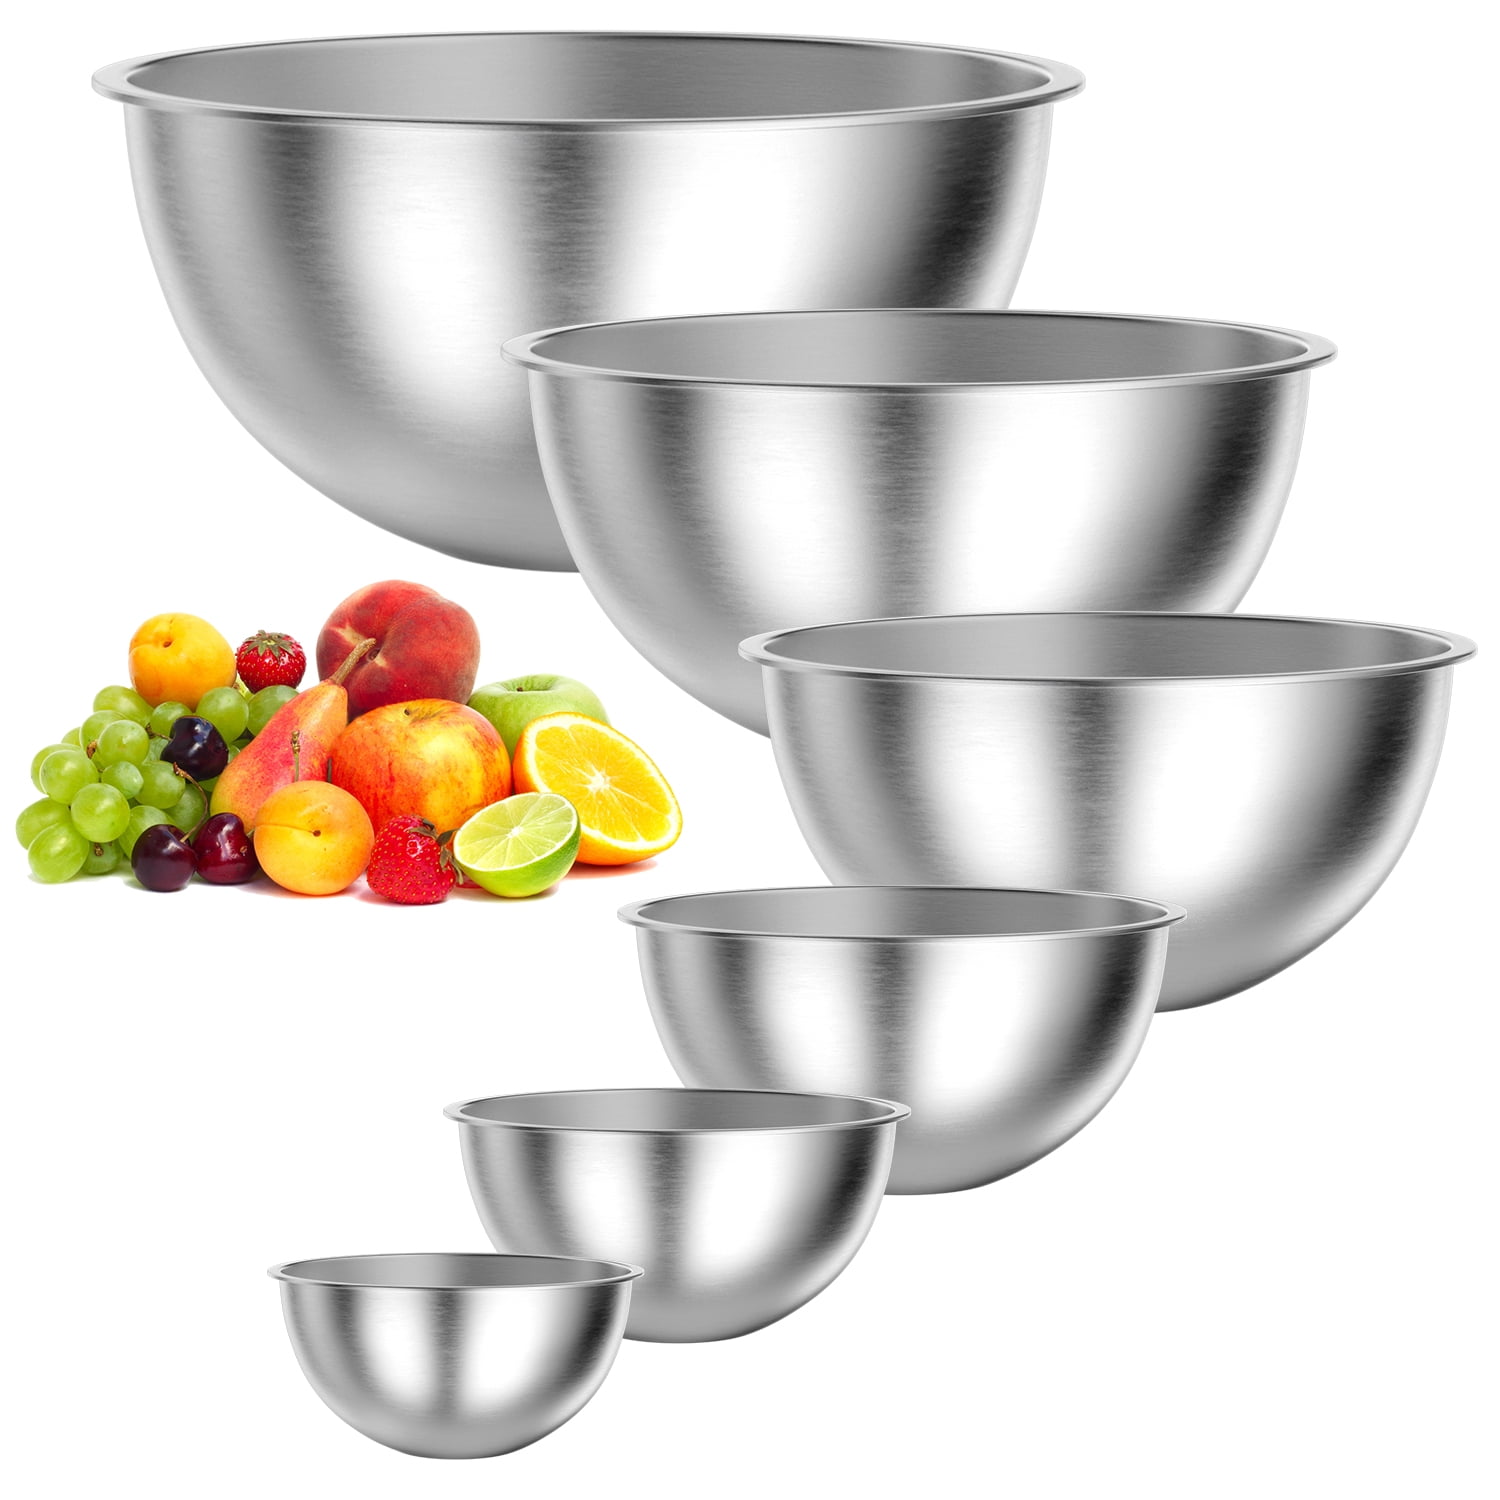 TINANA Stainless Steel Mixing Bowls with Airtight Lids: Set of 3 Nesting  Bowls with Graters, Handles, Pour Spouts and Measurement Marks-Red 